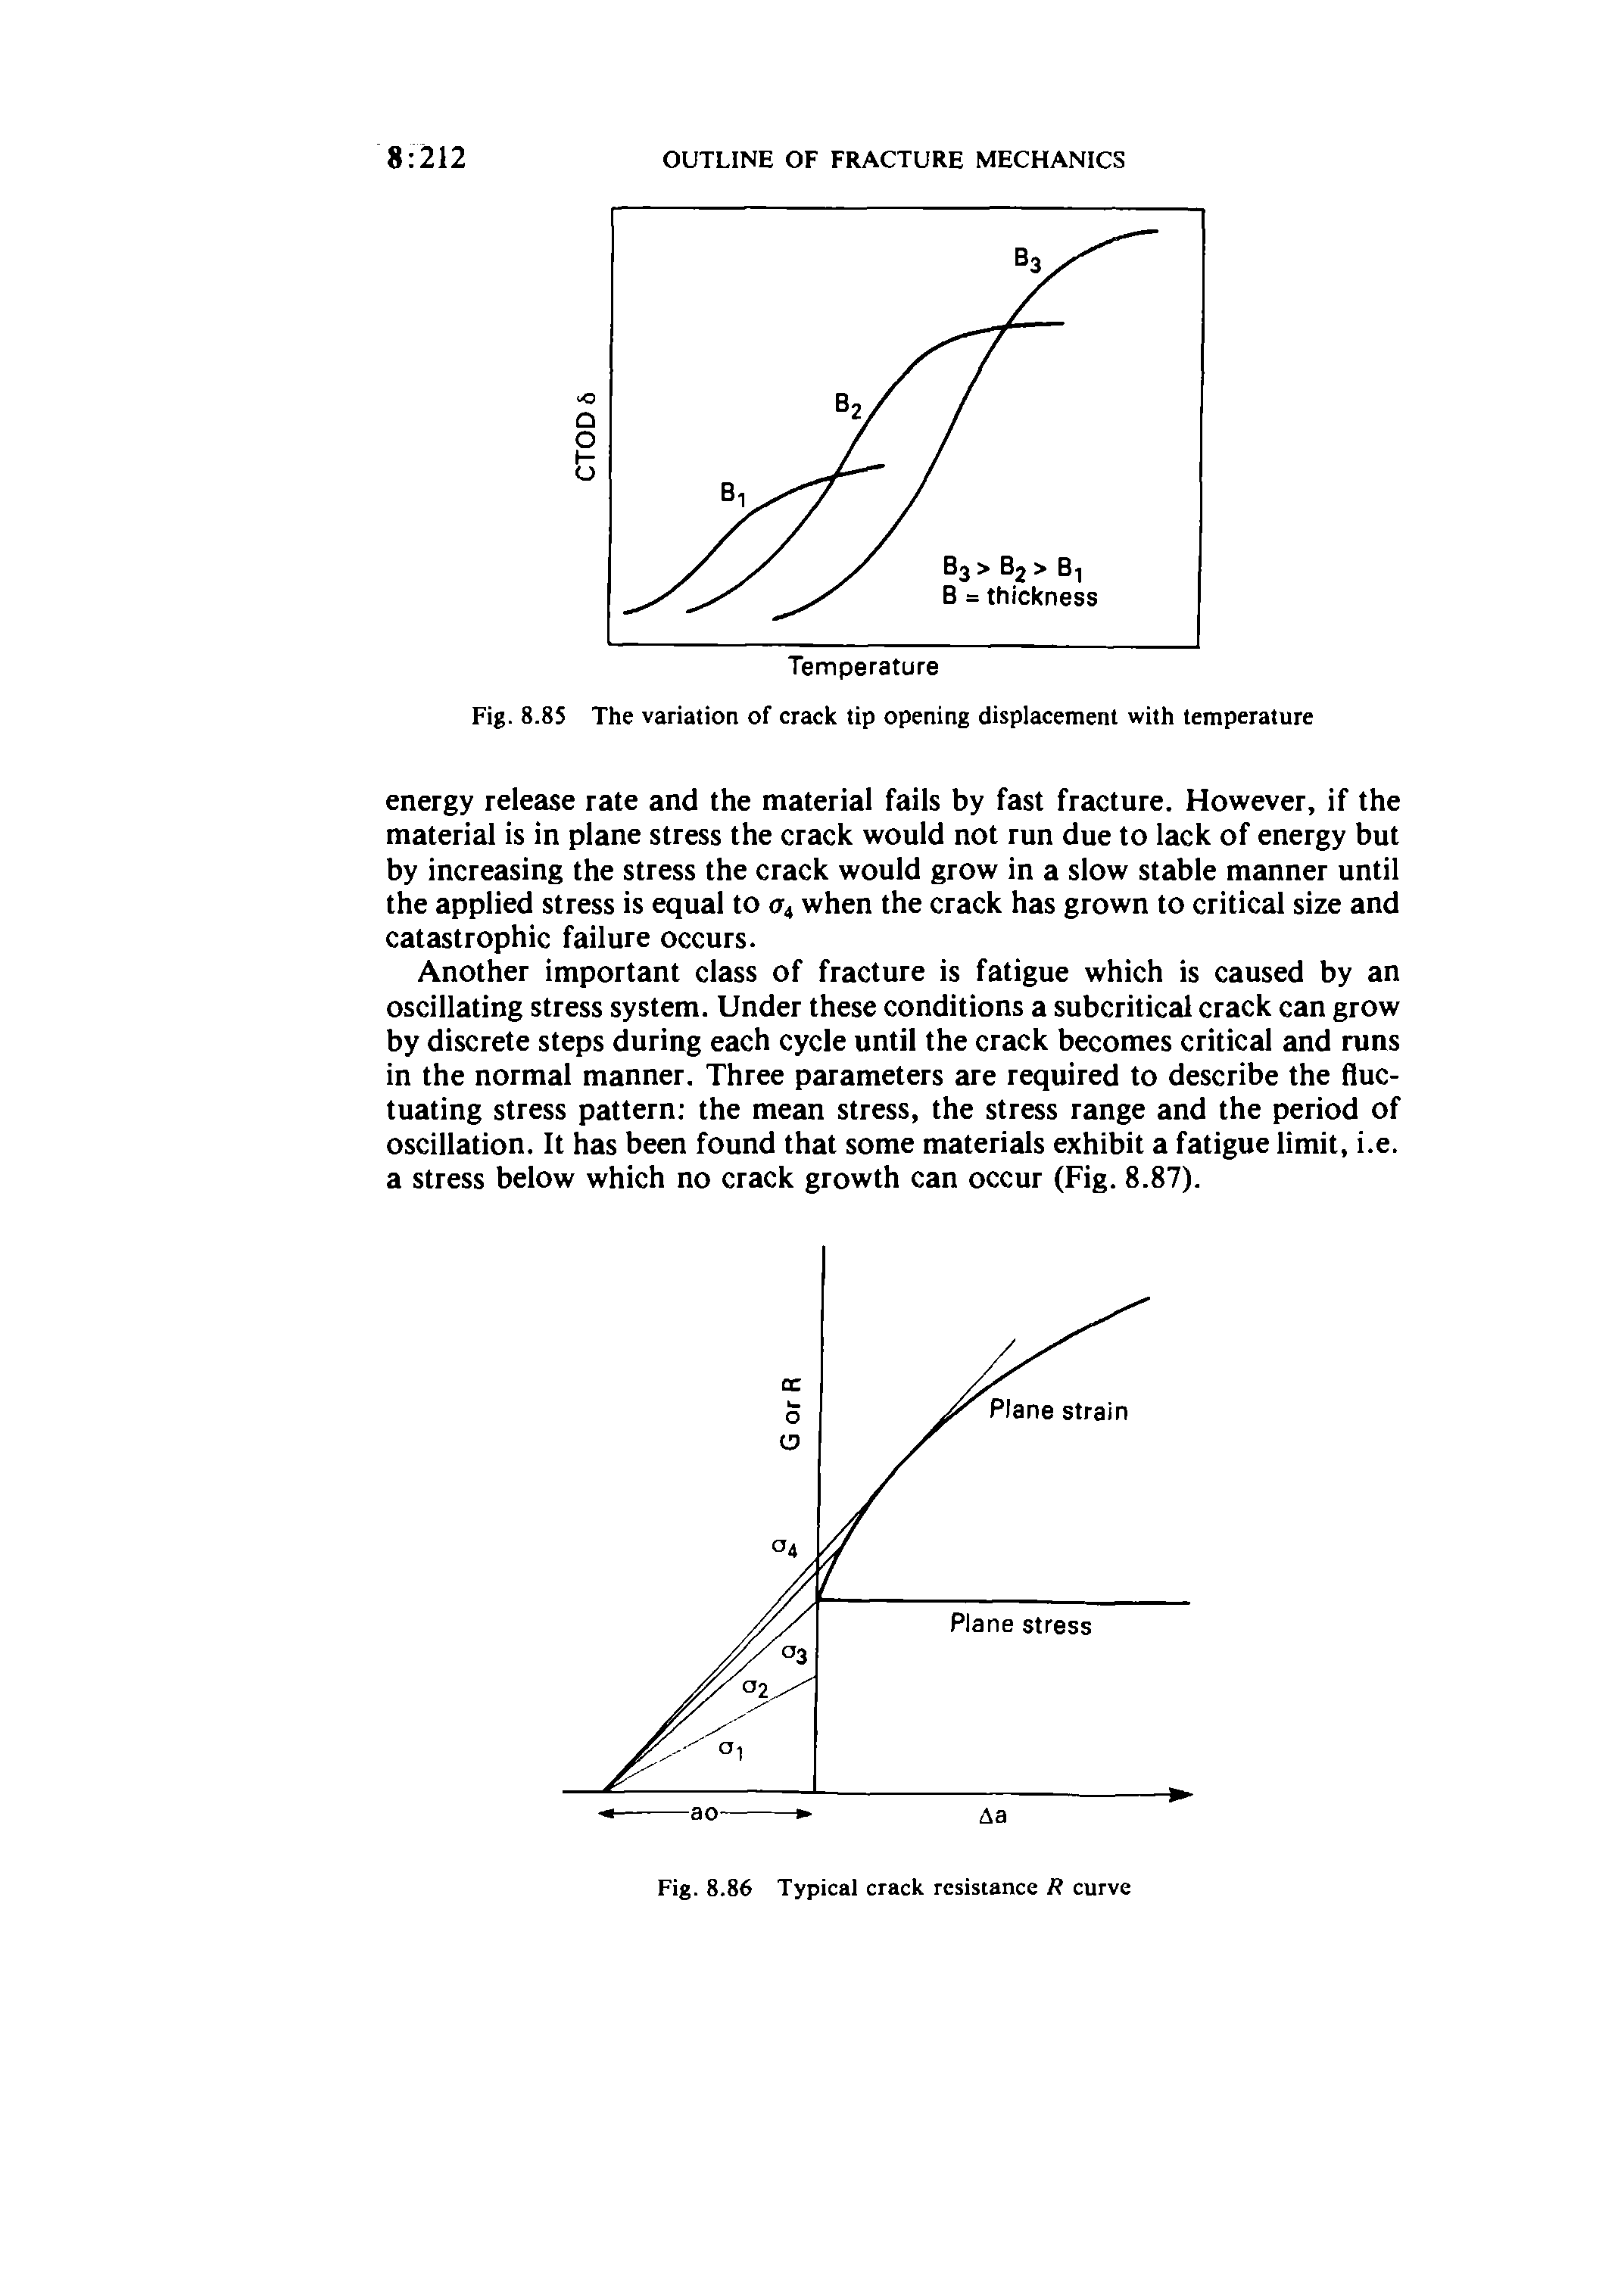 Fig. 8.85 The variation of crack tip opening displacement with temperature...